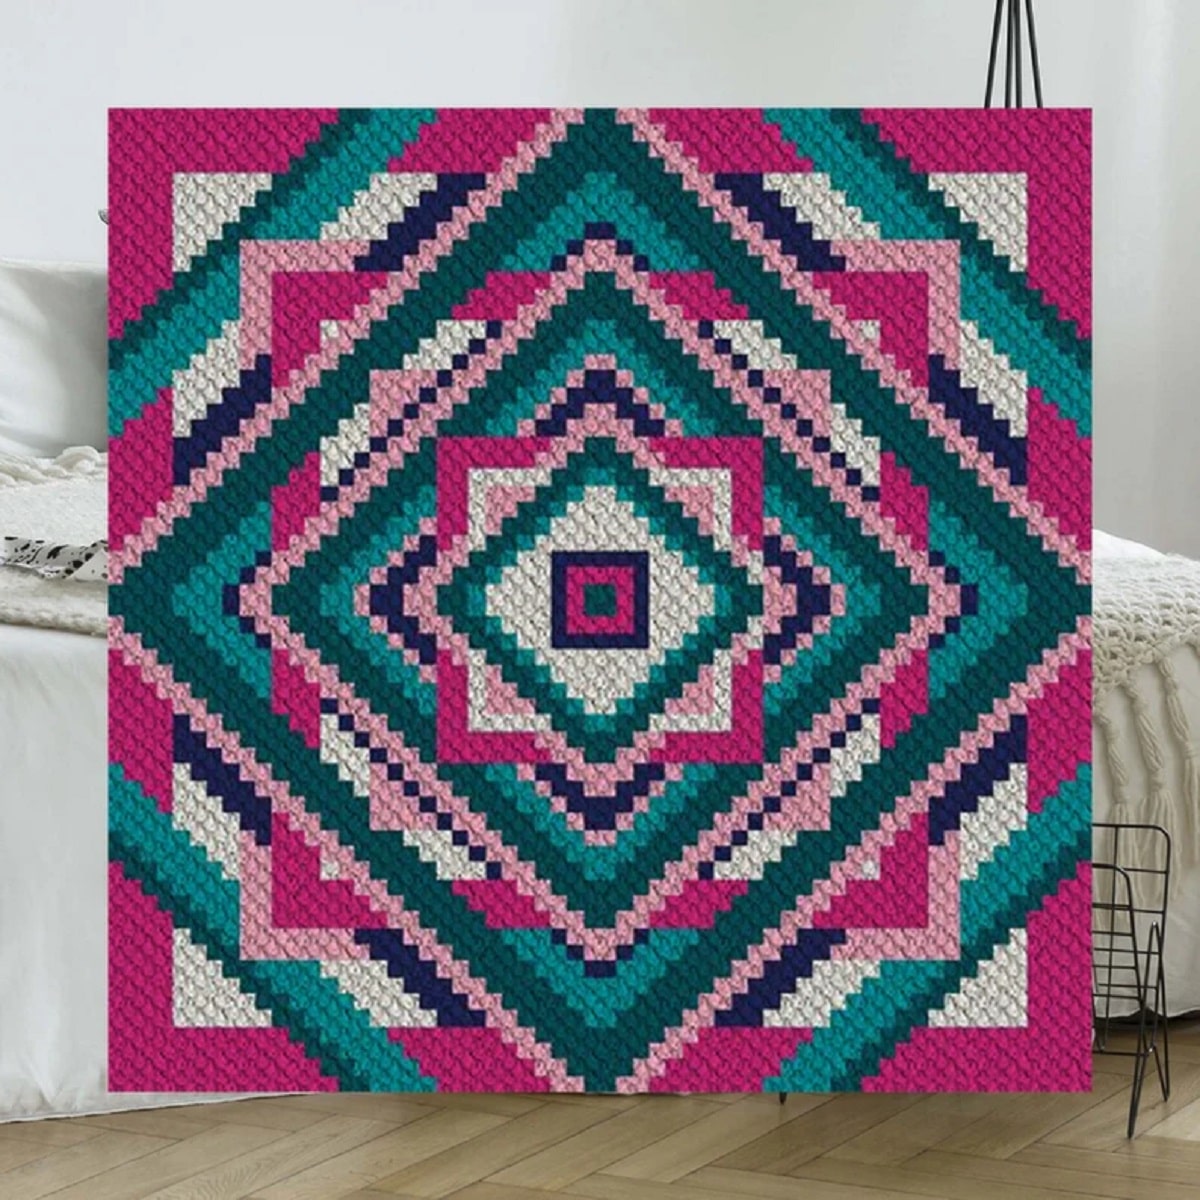 Large crochet afghan square with square and diamond patterns in pink, purple, green, and white in front of a white sofa.